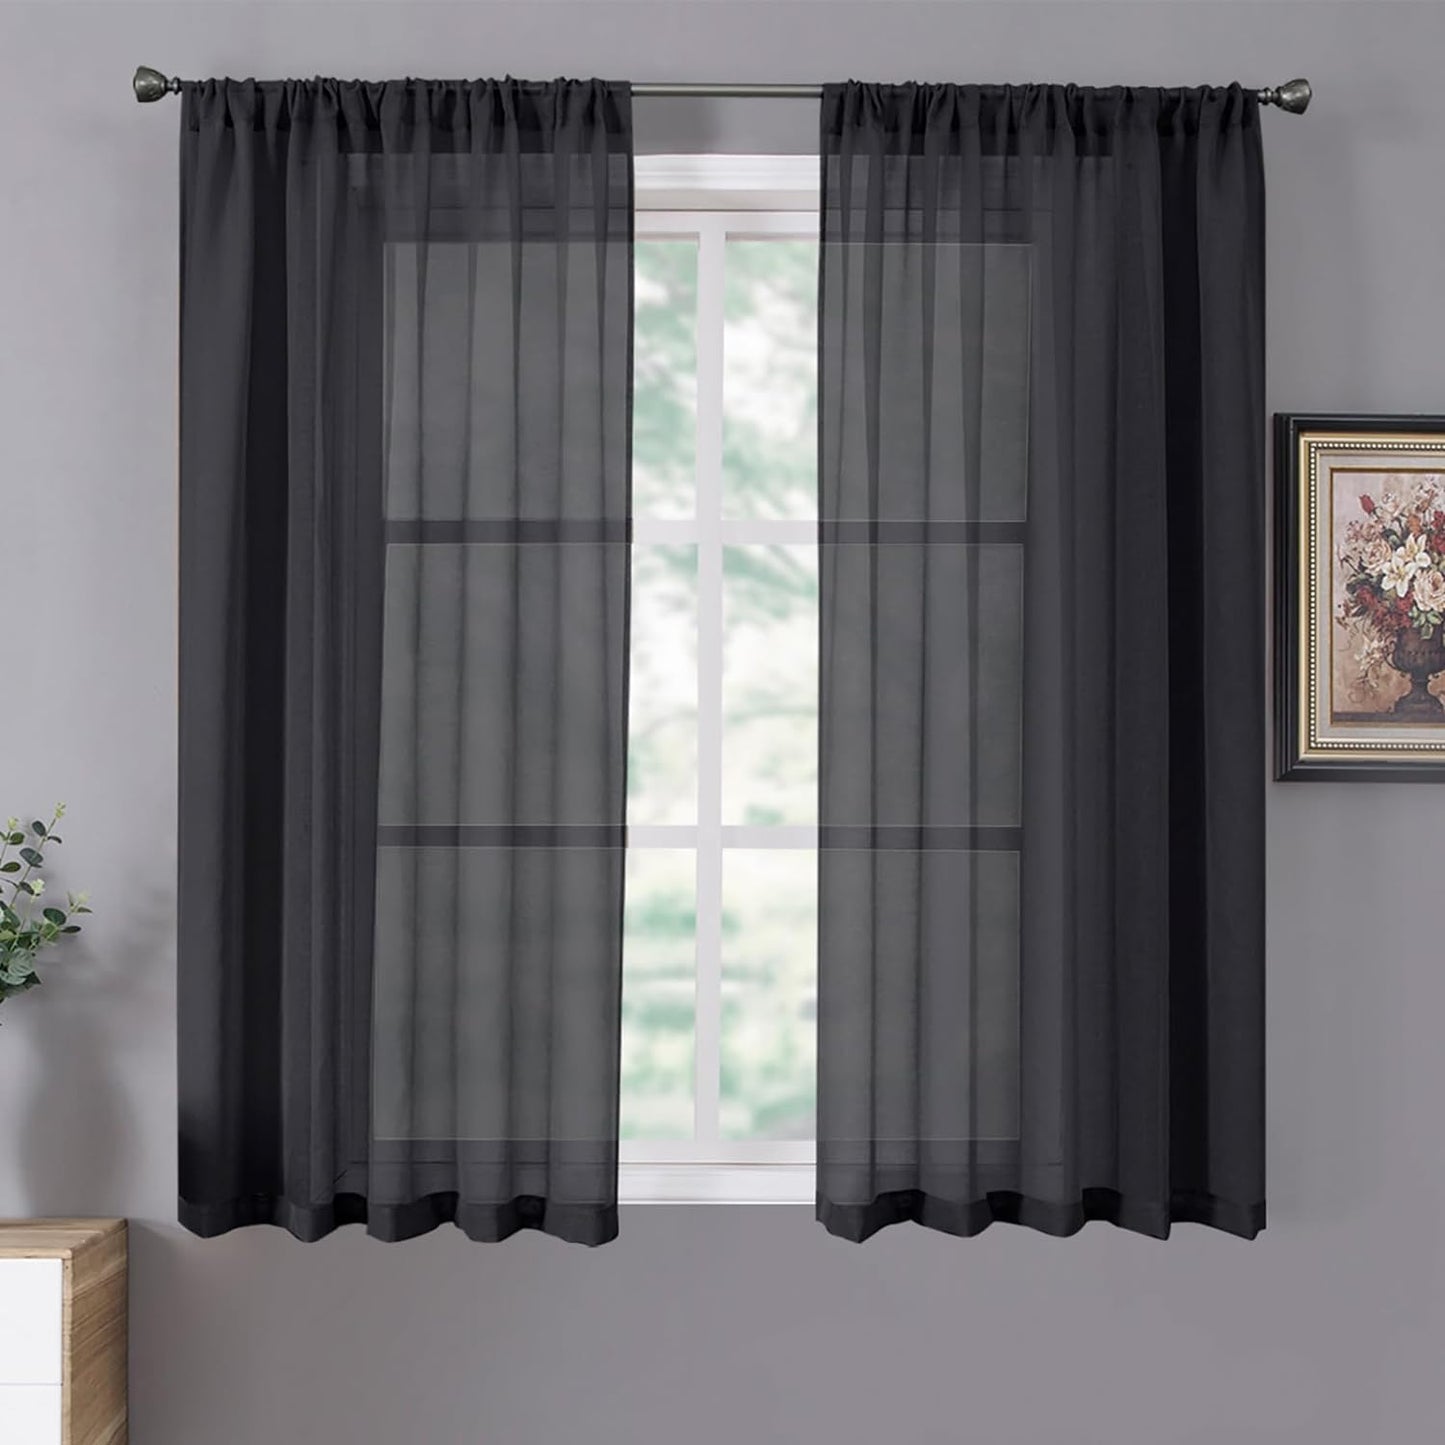 Tollpiz Short Sheer Curtains Linen Textured Bedroom Curtain Sheers Light Filtering Rod Pocket Voile Curtains for Living Room, 54 X 45 Inches Long, White, Set of 2 Panels  Tollpiz Tex Black 42"W X 54"L 